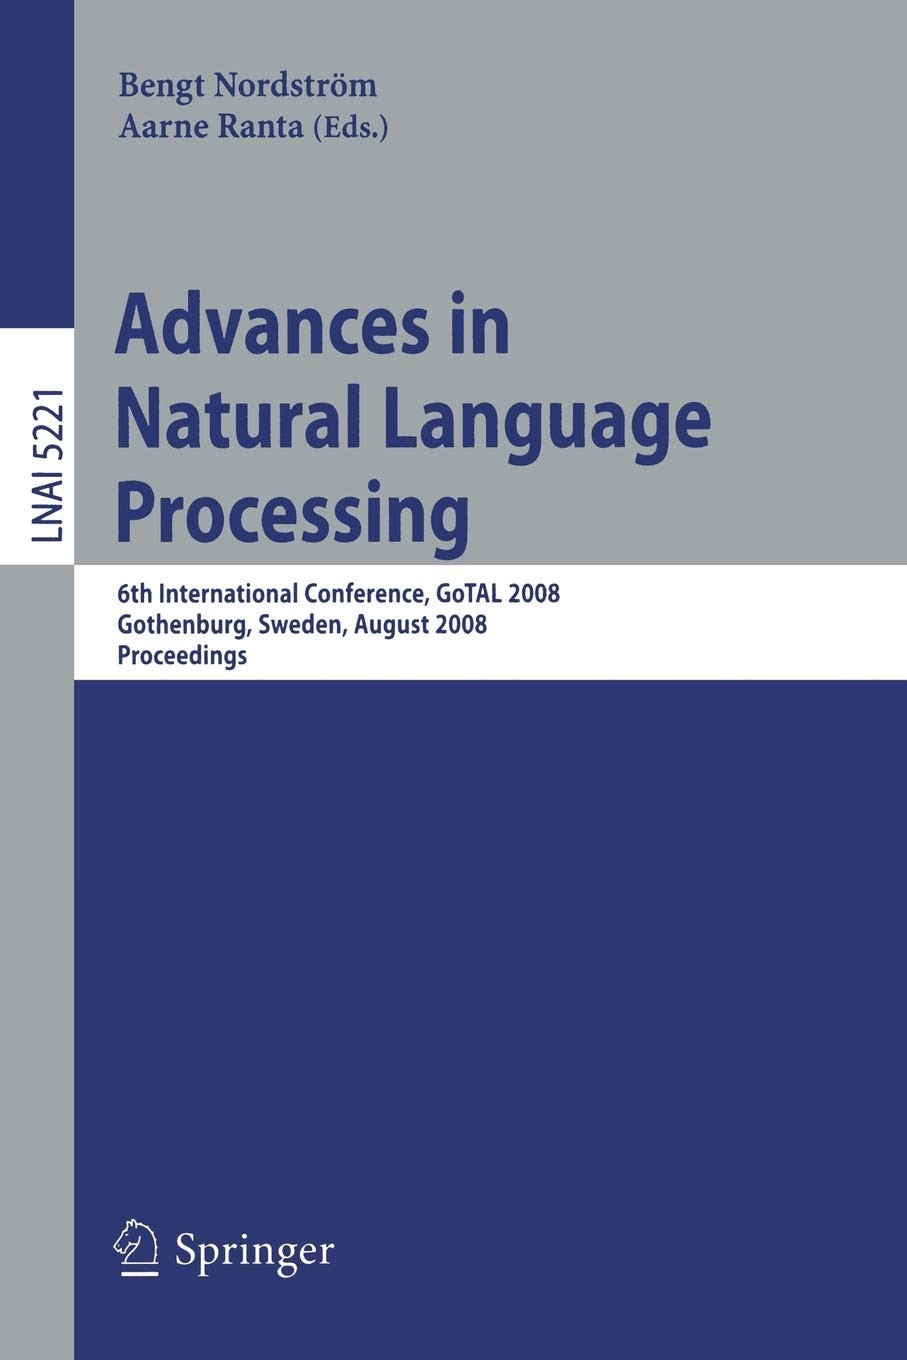 Advances in Natural Language Processing: 6th International Conference, GoTAL 2008, Gothenburg, Sweden, August 25-27, 2008, Proceedings